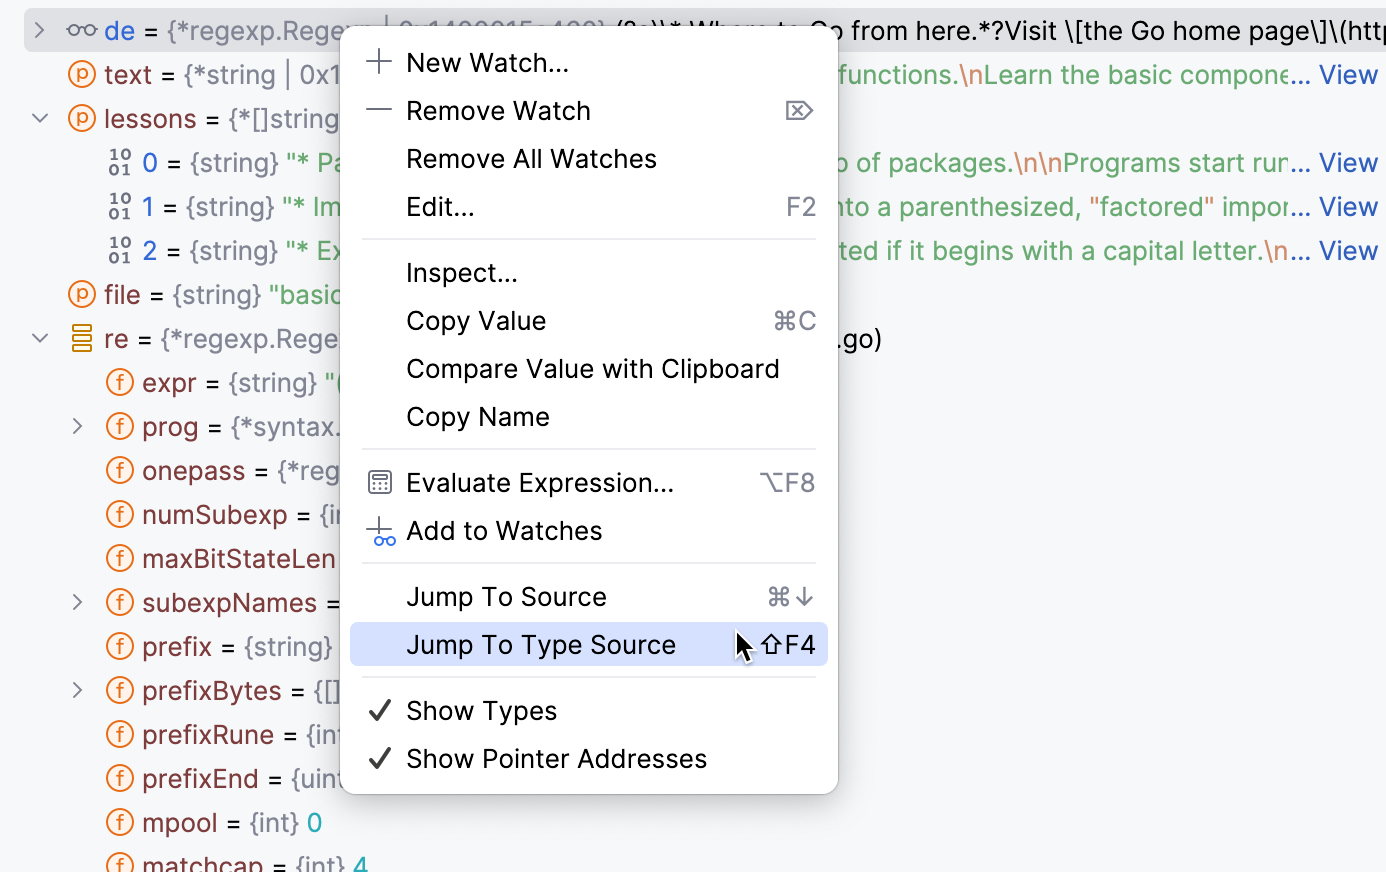 Jump to Type Source takes you to the place where the type of the variable is defined